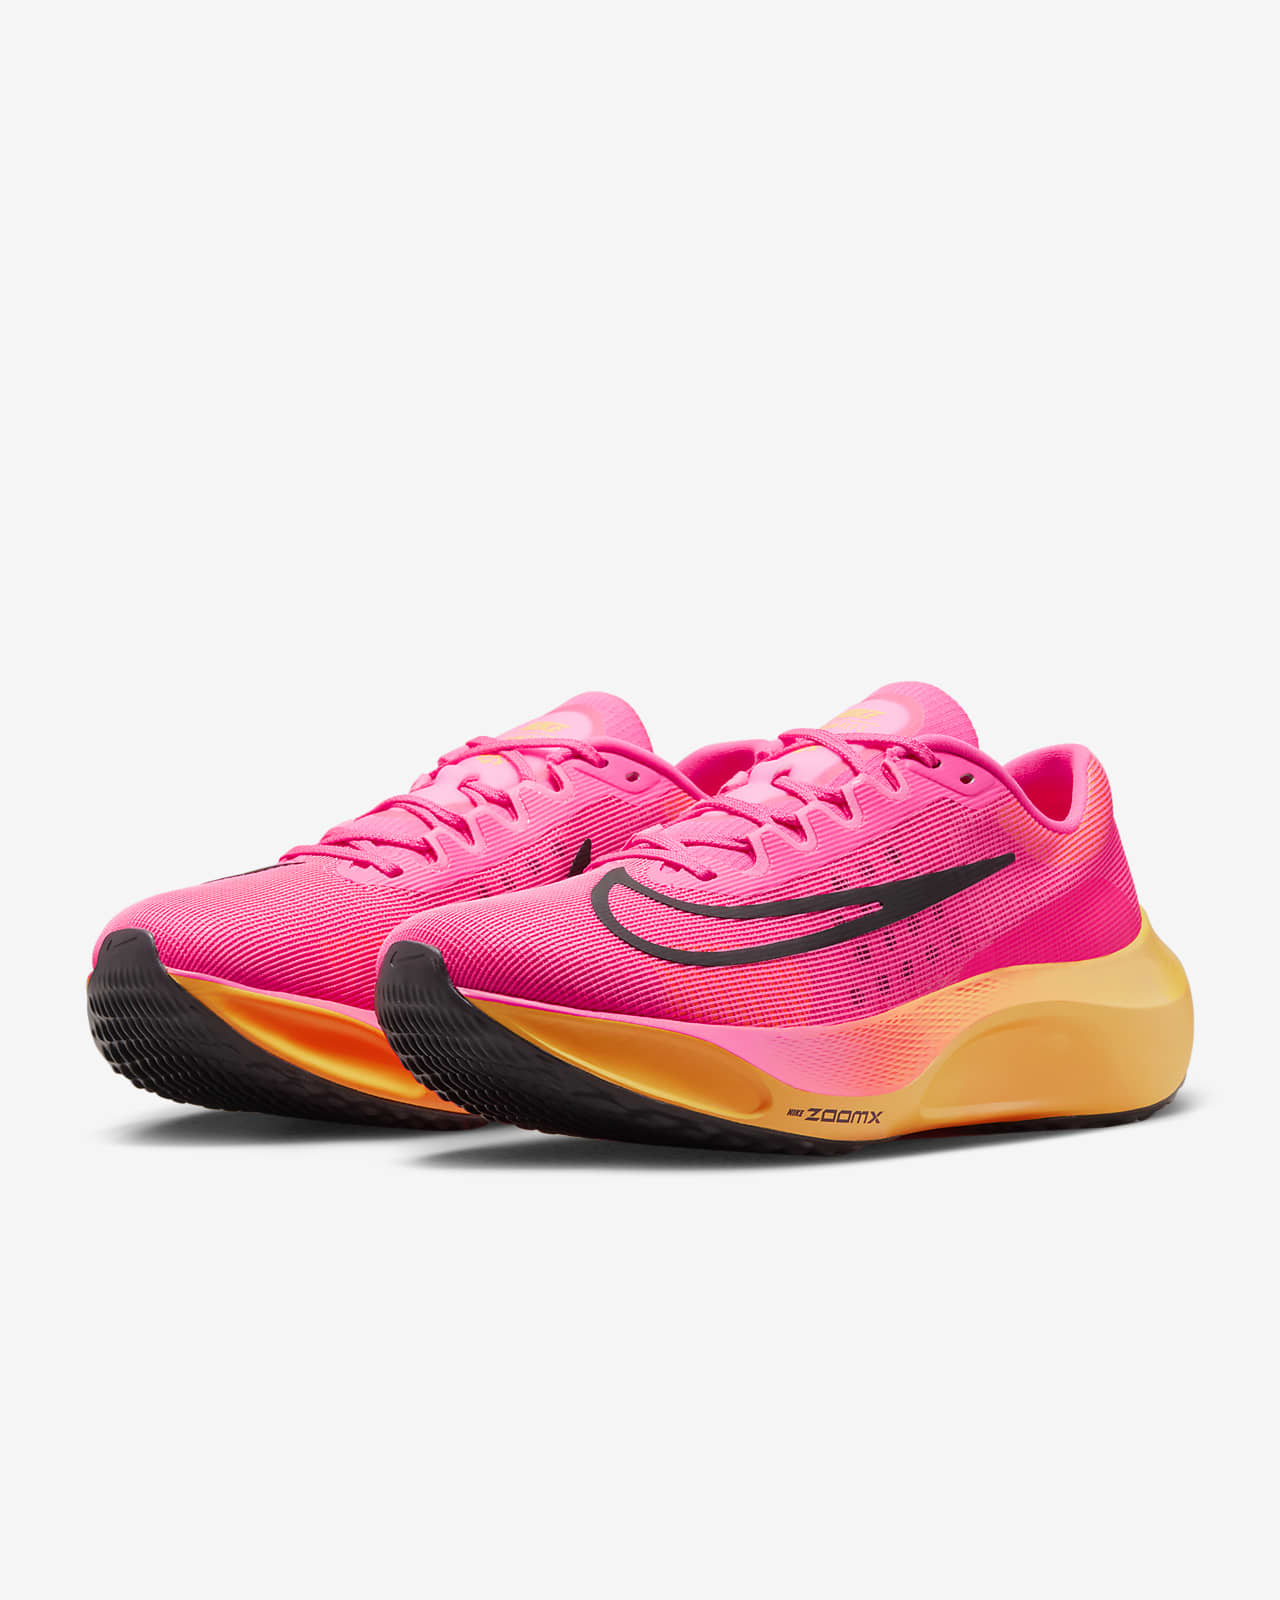 Chaussures de running Nike Zoom Fly 5 - Zoom Fly - Nike - Chaussures Homme